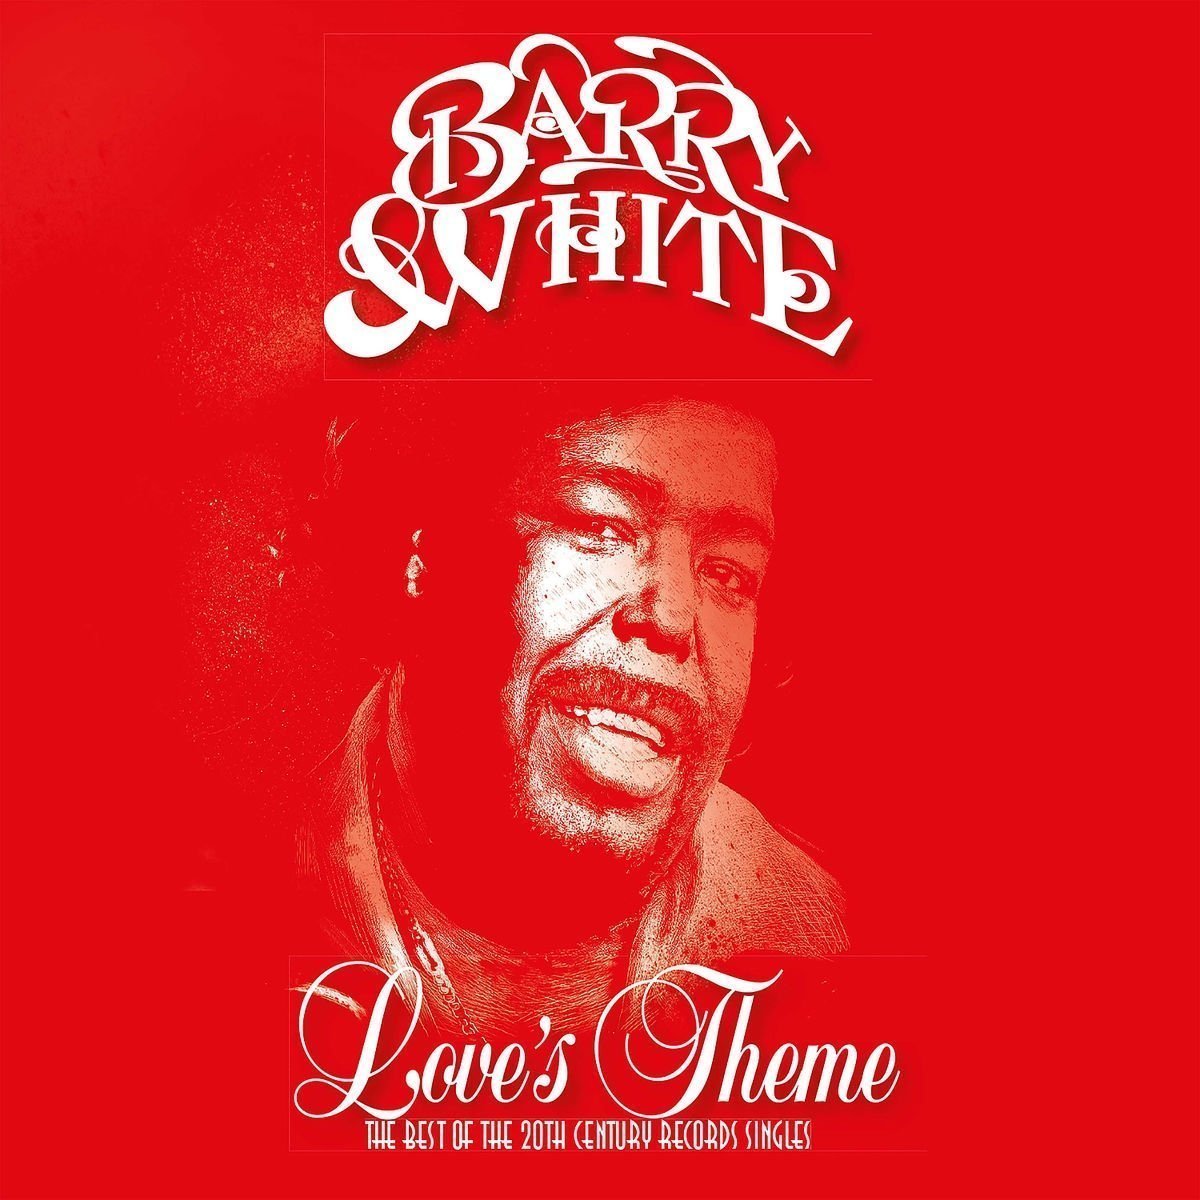 Vinyl Record Barry White - Love's Theme: The Best Of The 20th Century Records Singles (2 LP)